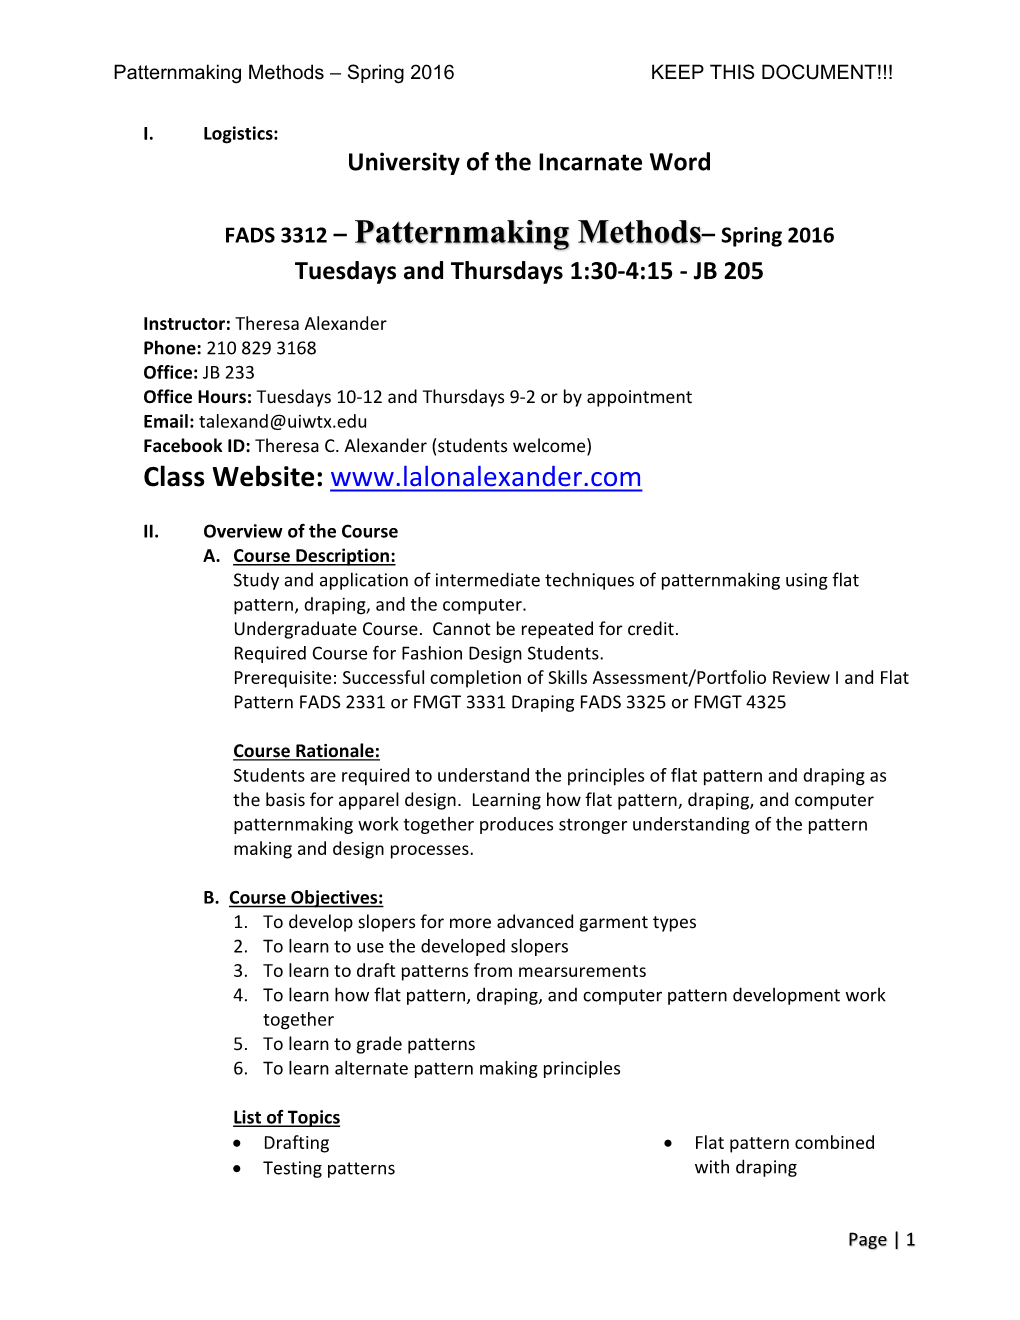 FADS 3312 – Patternmaking Methods– Spring 2016 Tuesdays and Thursdays 1:30-4:15 - JB 205